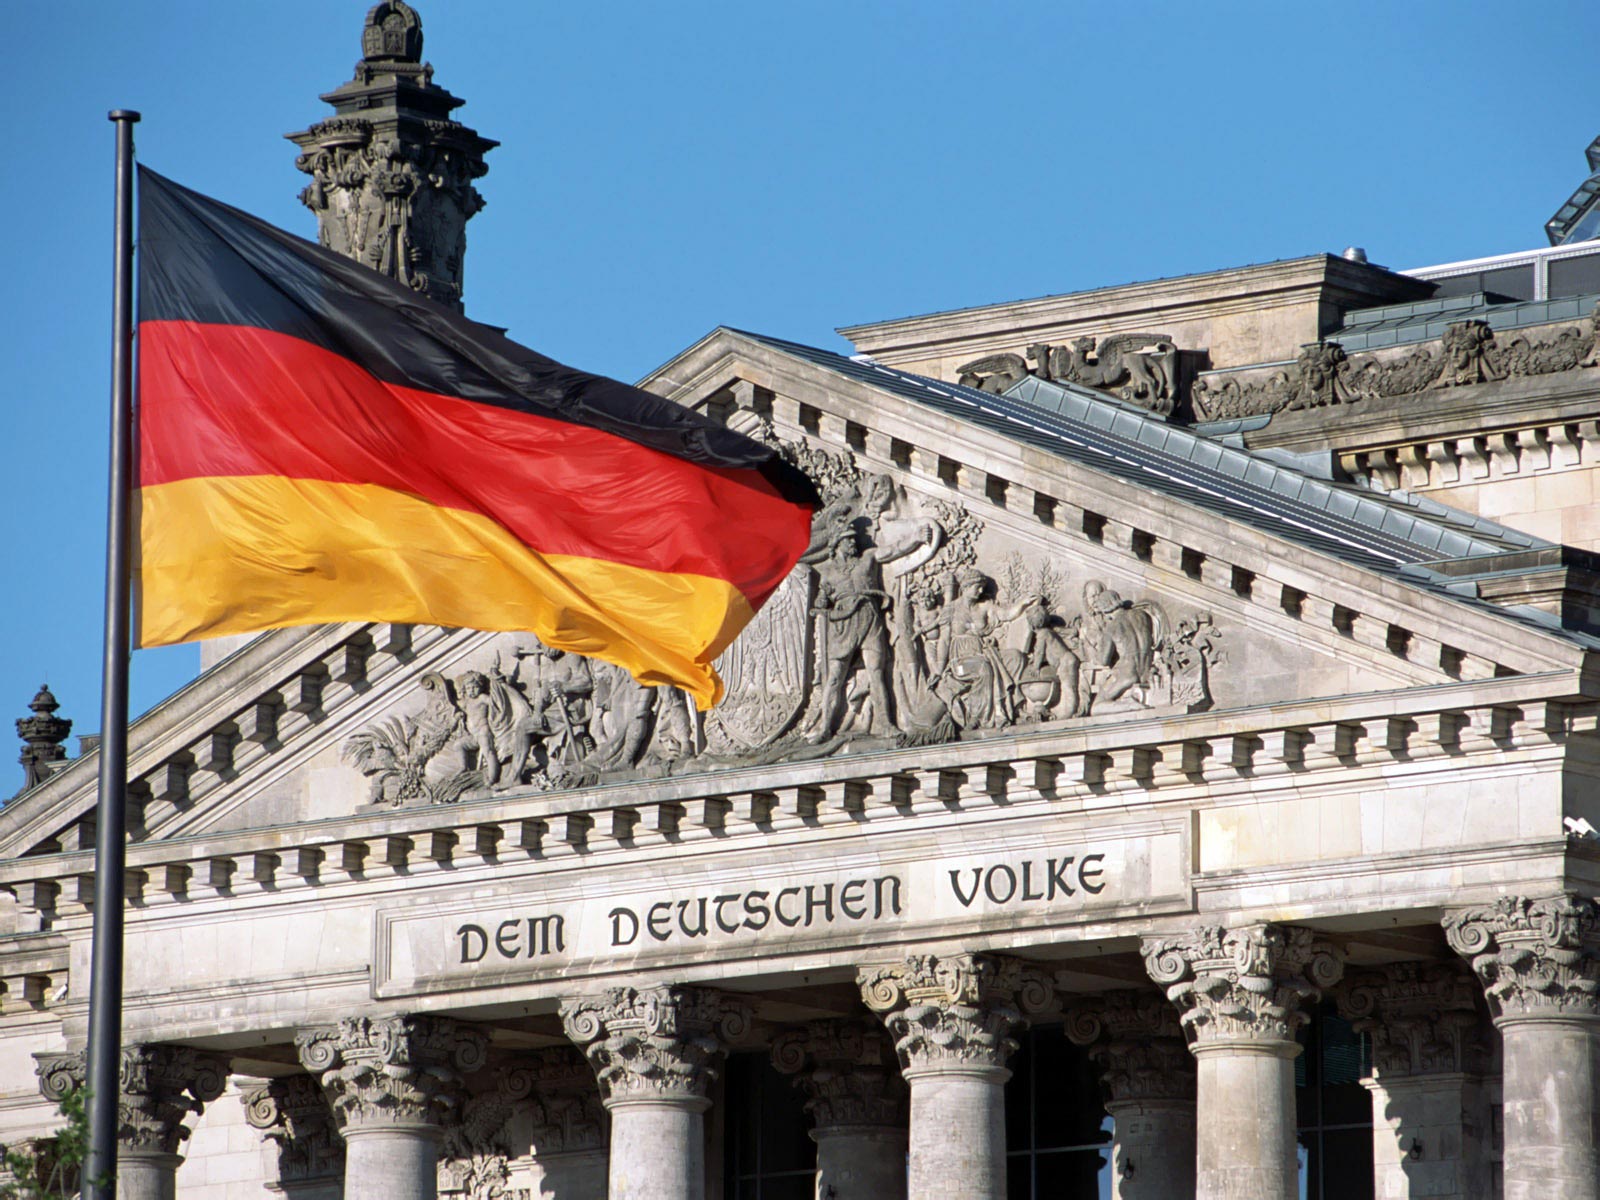 Reichstag Building Wallpapers